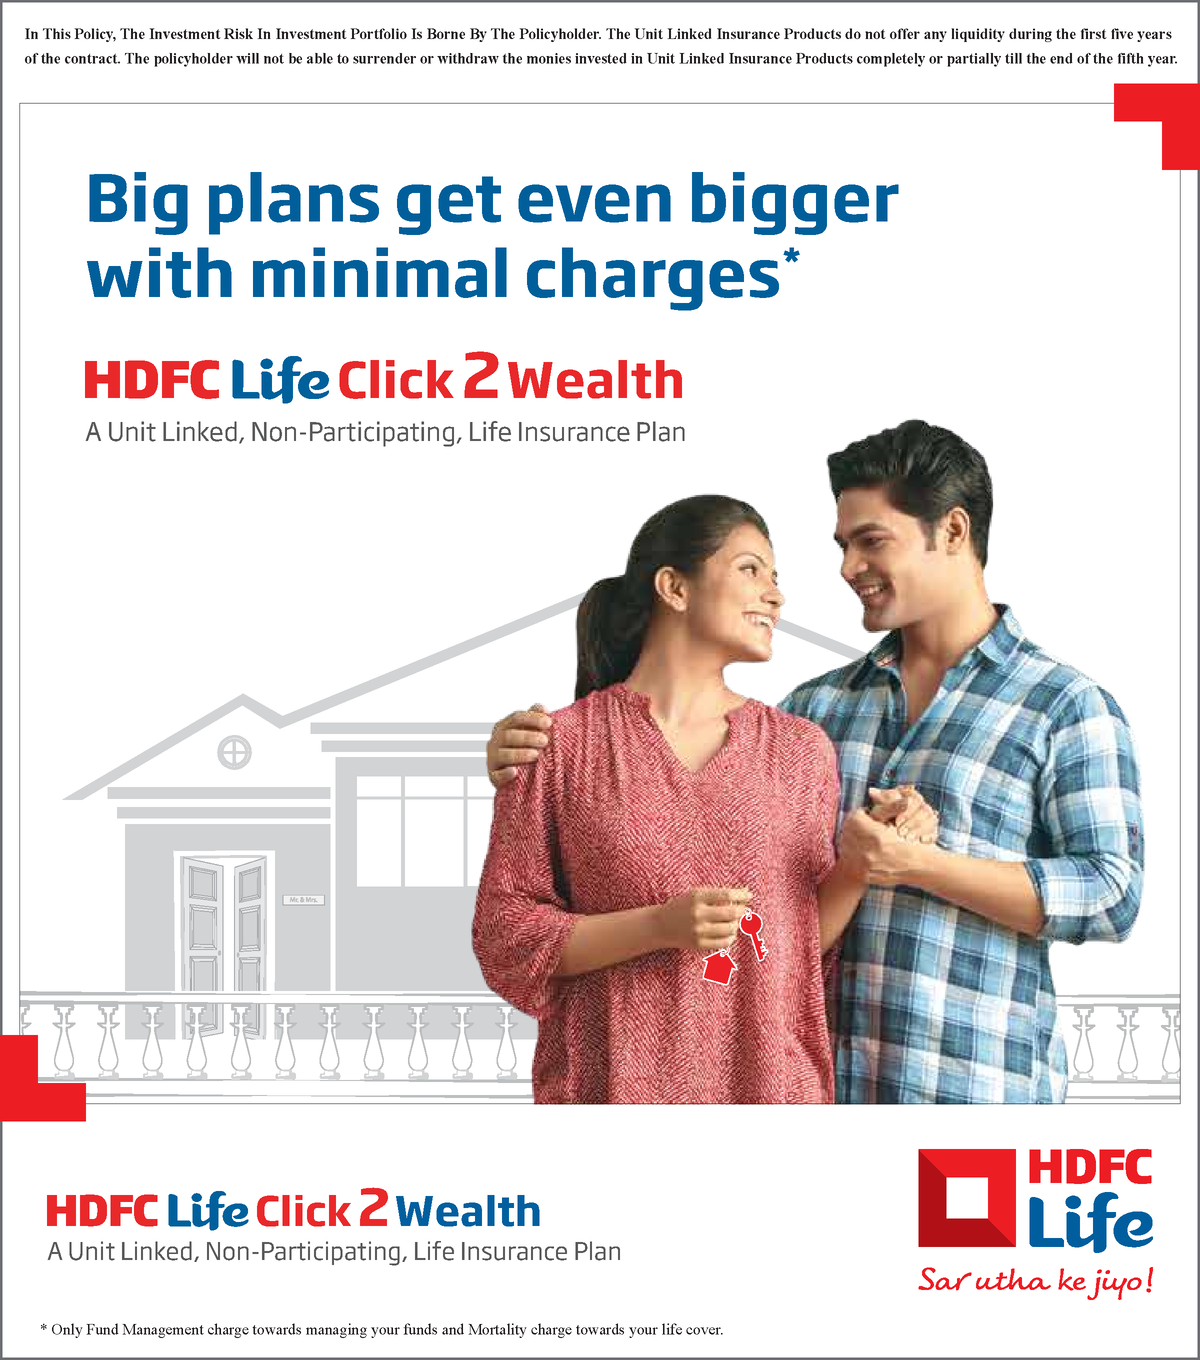 Hdfc Life Click 2 Wealth Brochure Retail V3 In This Policy The Investment Risk In Investment 8650